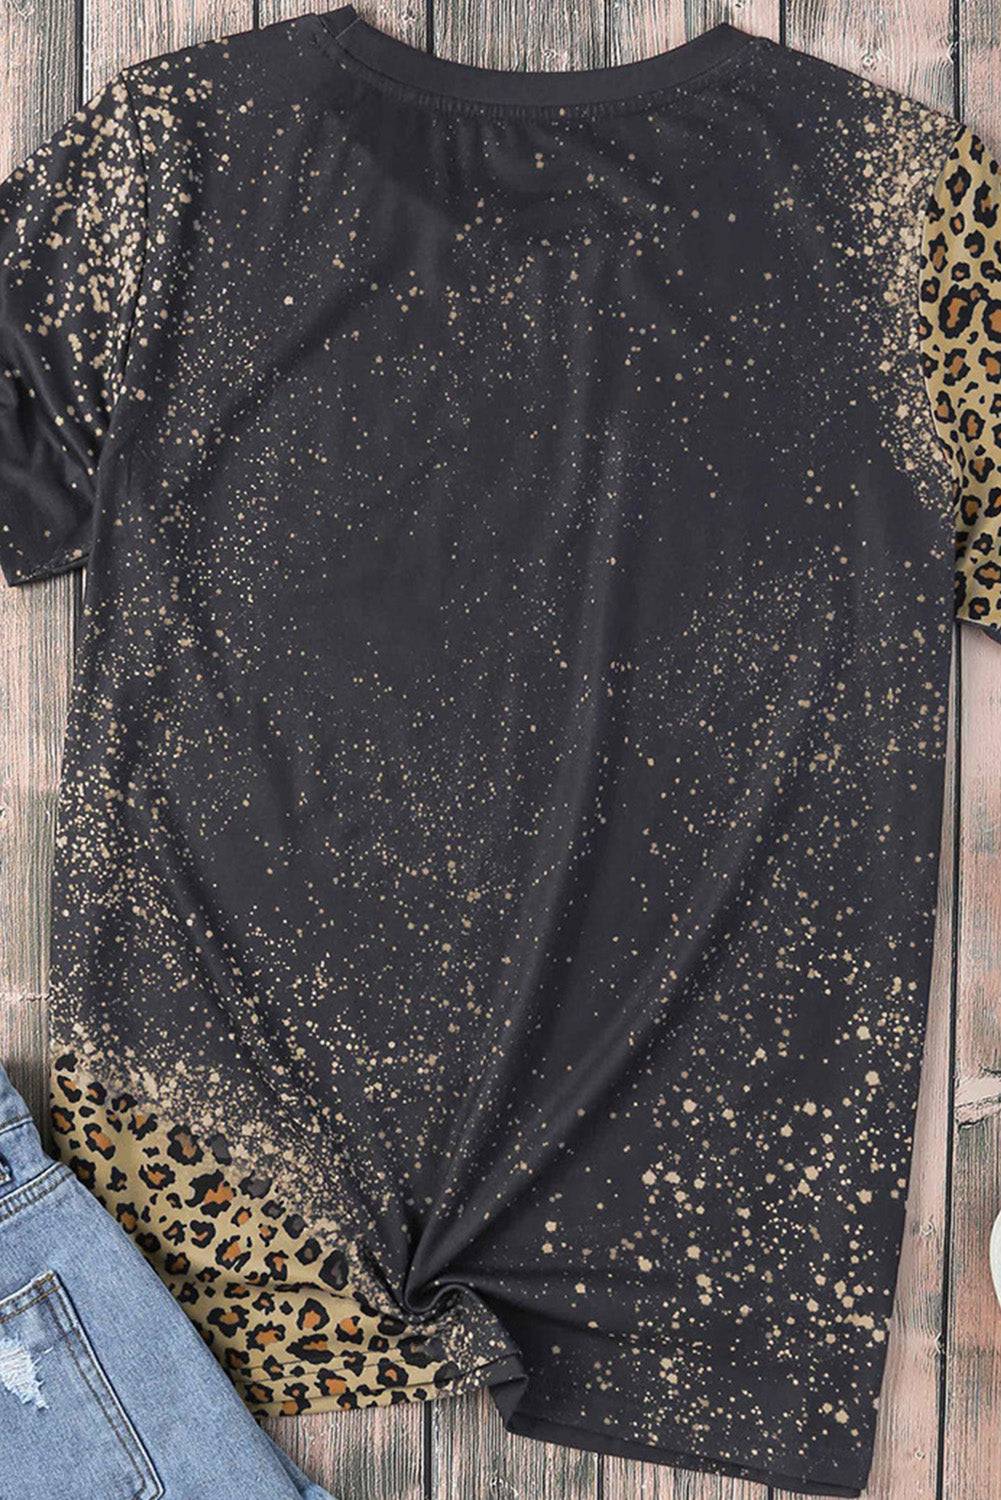 "Leopard's Romance - Ignite Your Passion for Fashion with Our Wildly Elegant Tee Shirt" - Guy Christopher